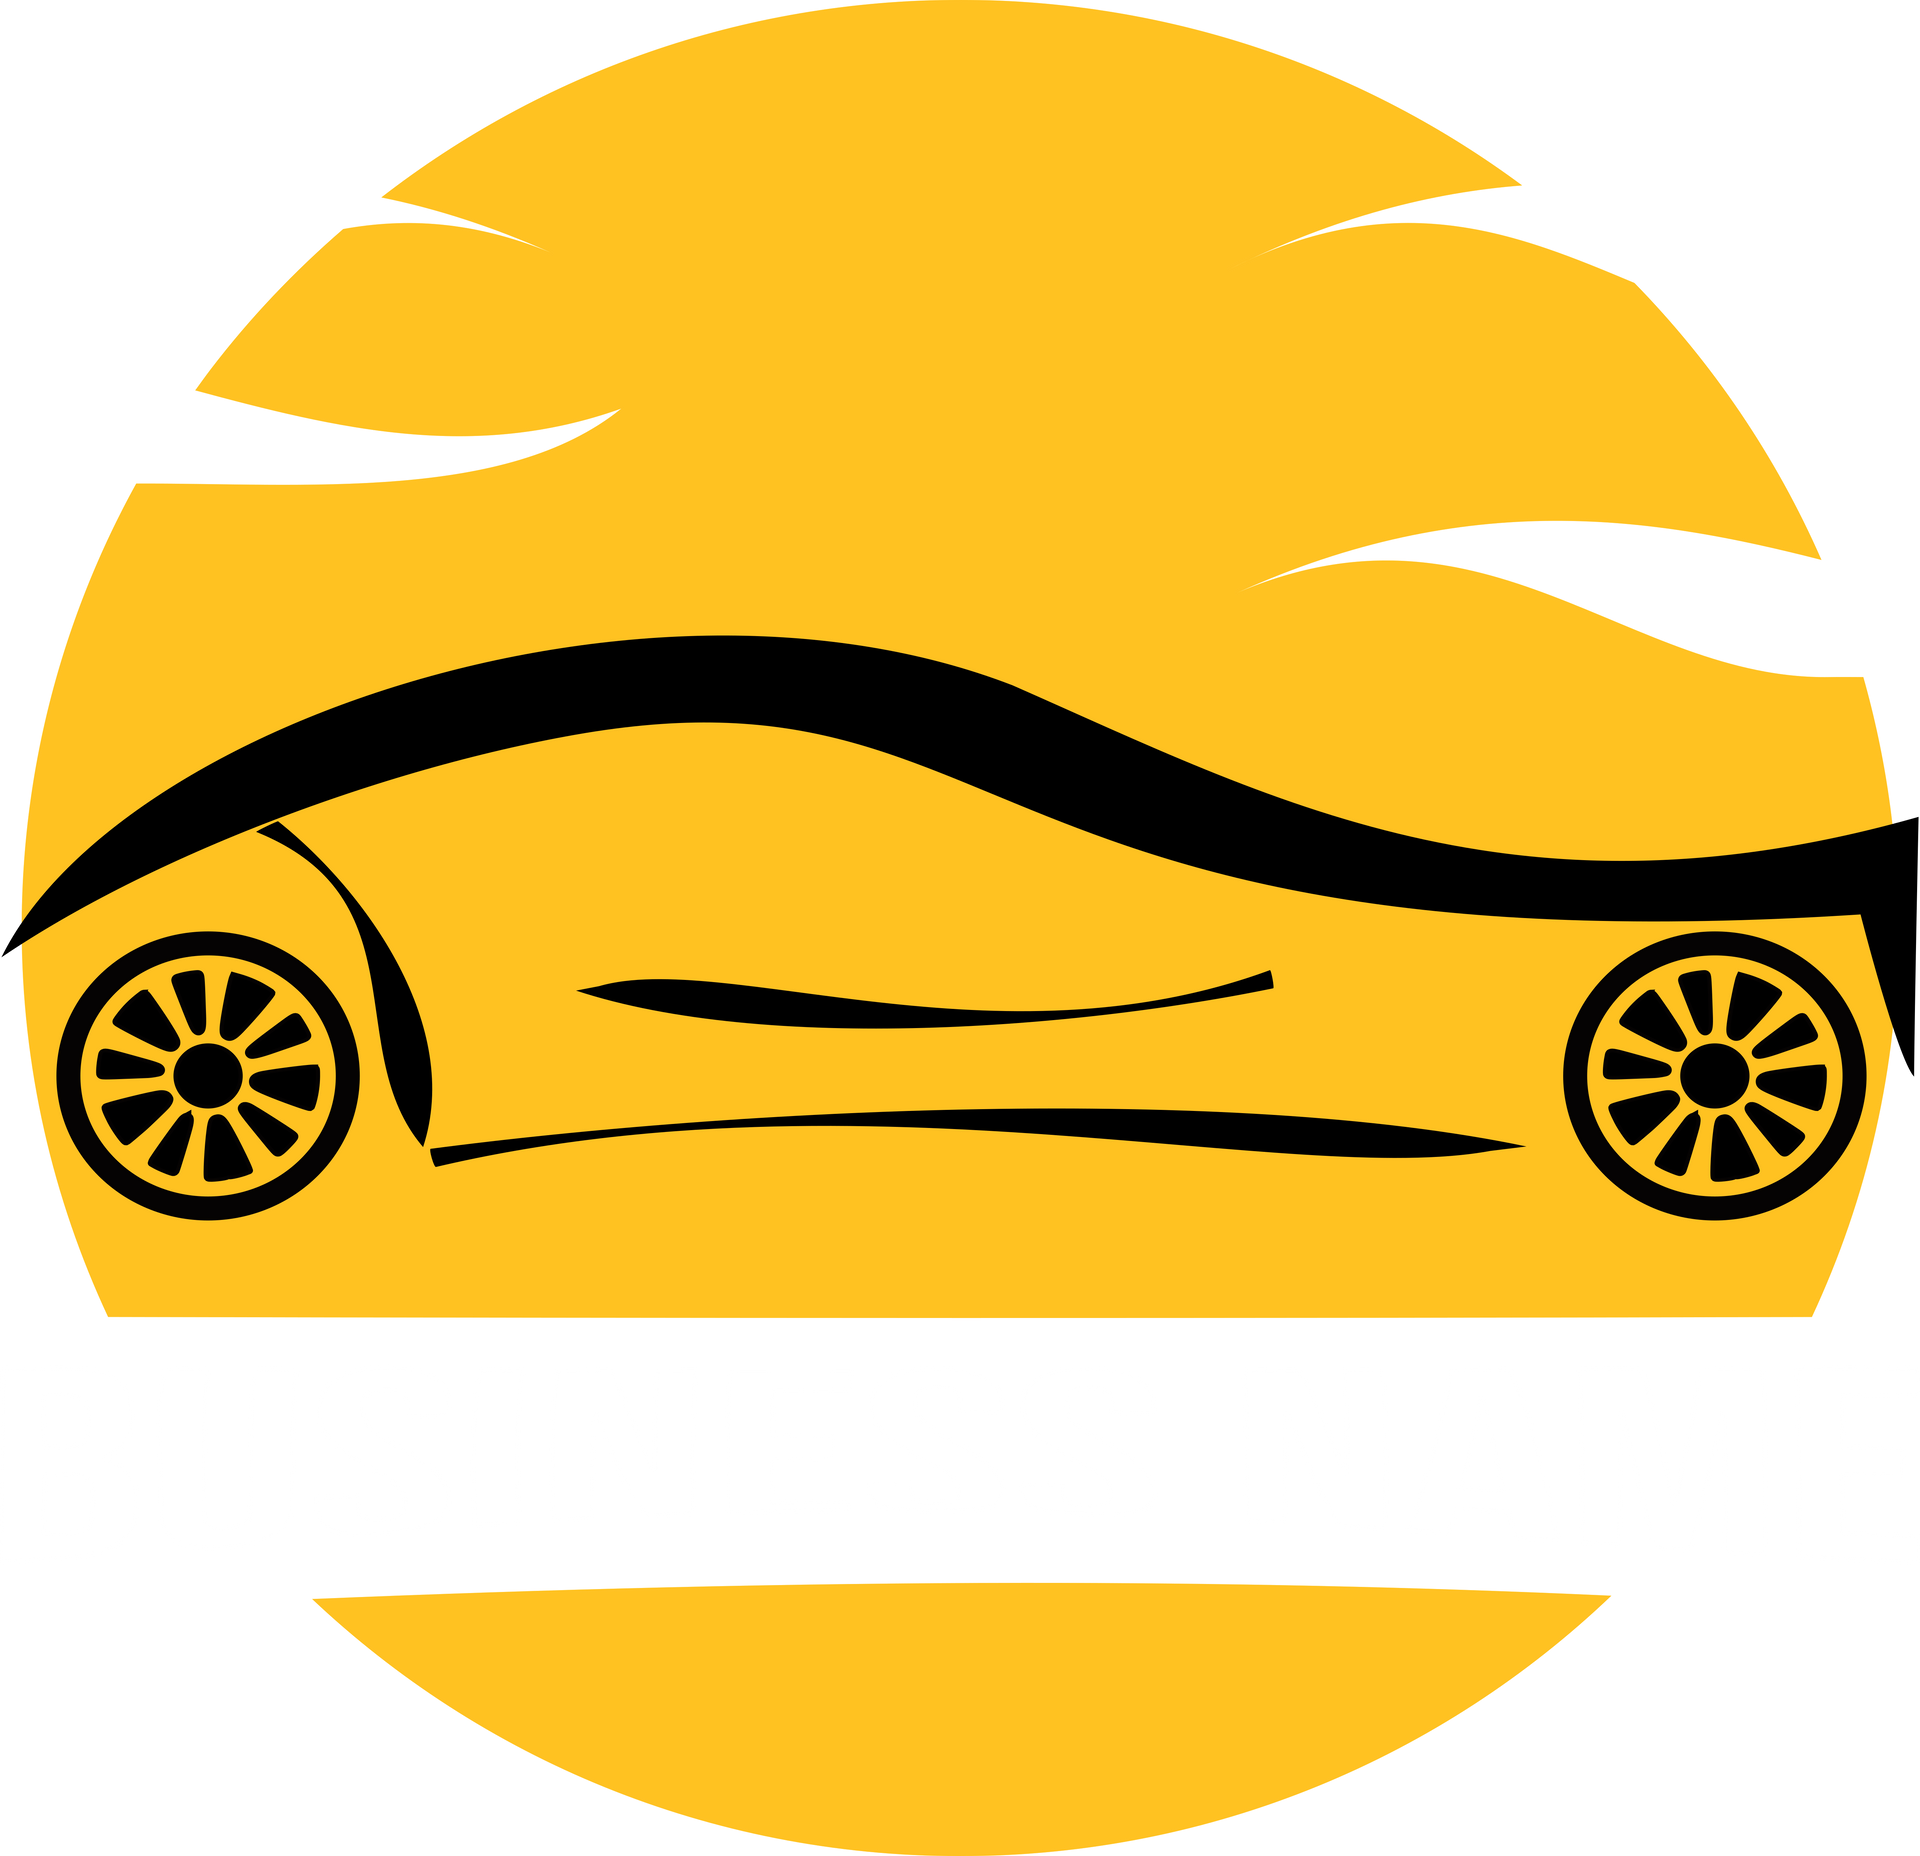 Dynamic automotive logo with stylized black car silhouette and ‘BUSINESS NAME’ text, ideal for branding and marketing in the vehicle industry.